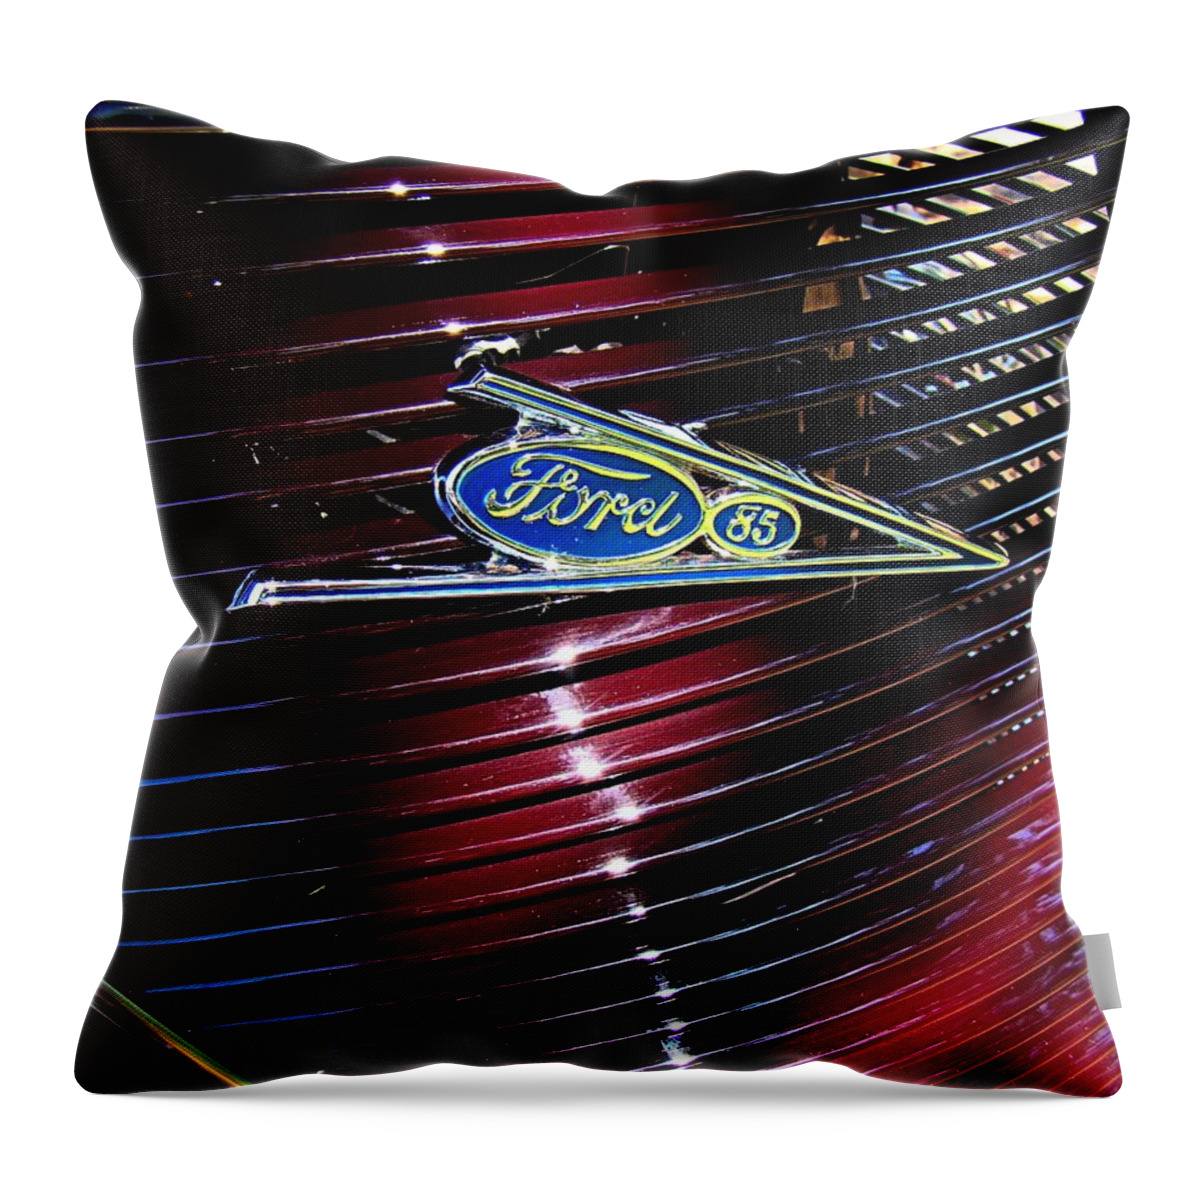 Ford Throw Pillow featuring the photograph Ford Model 85 Emblem by Nick Kloepping